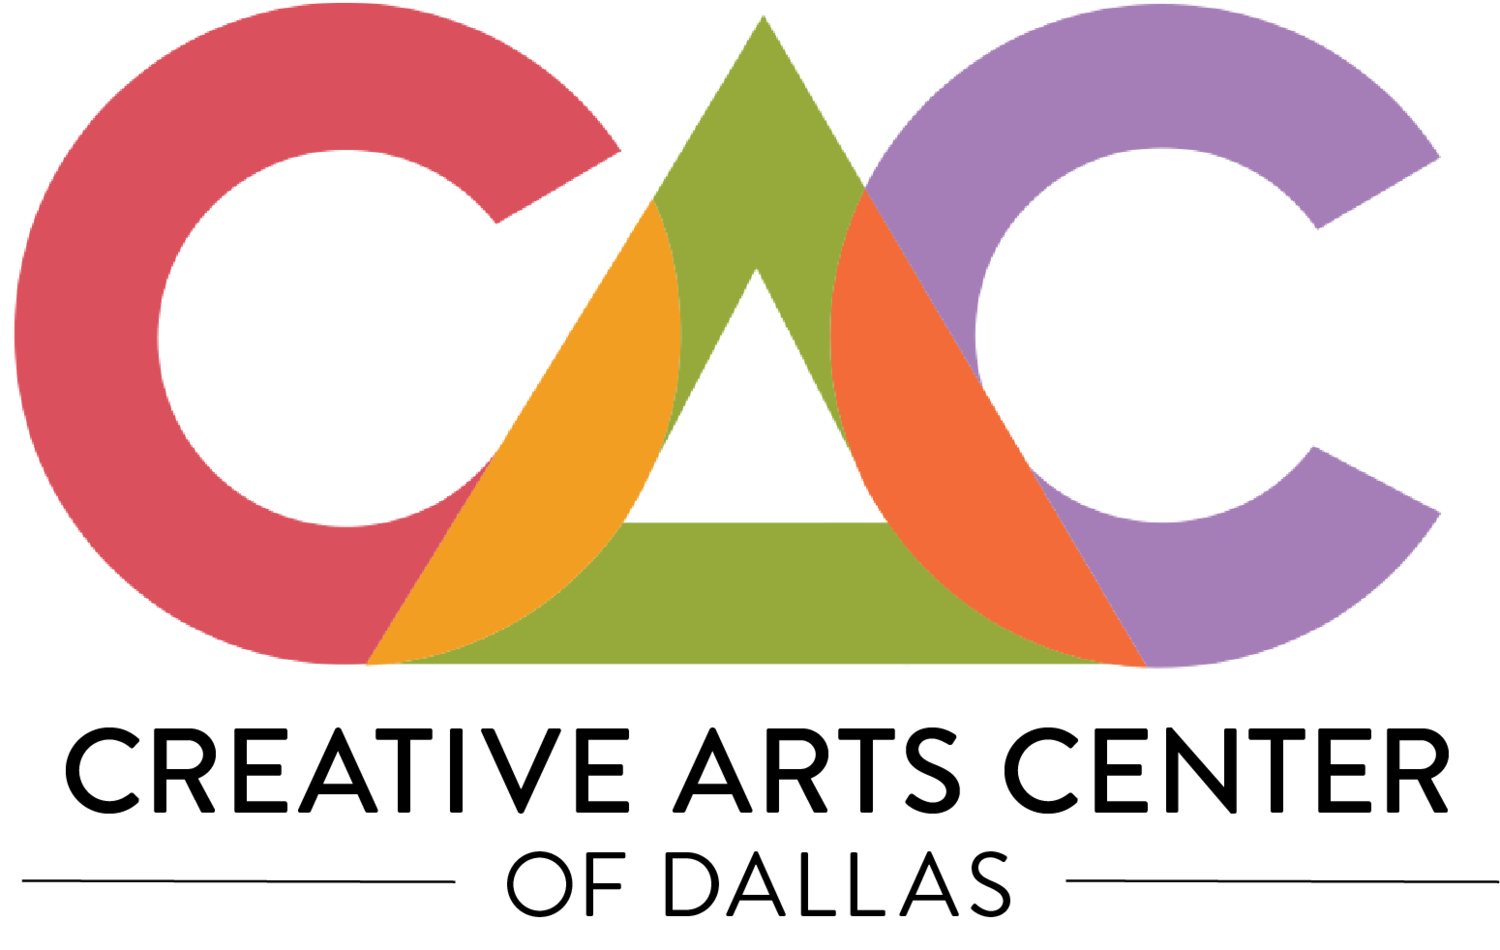 cac+logo+updated+2.png